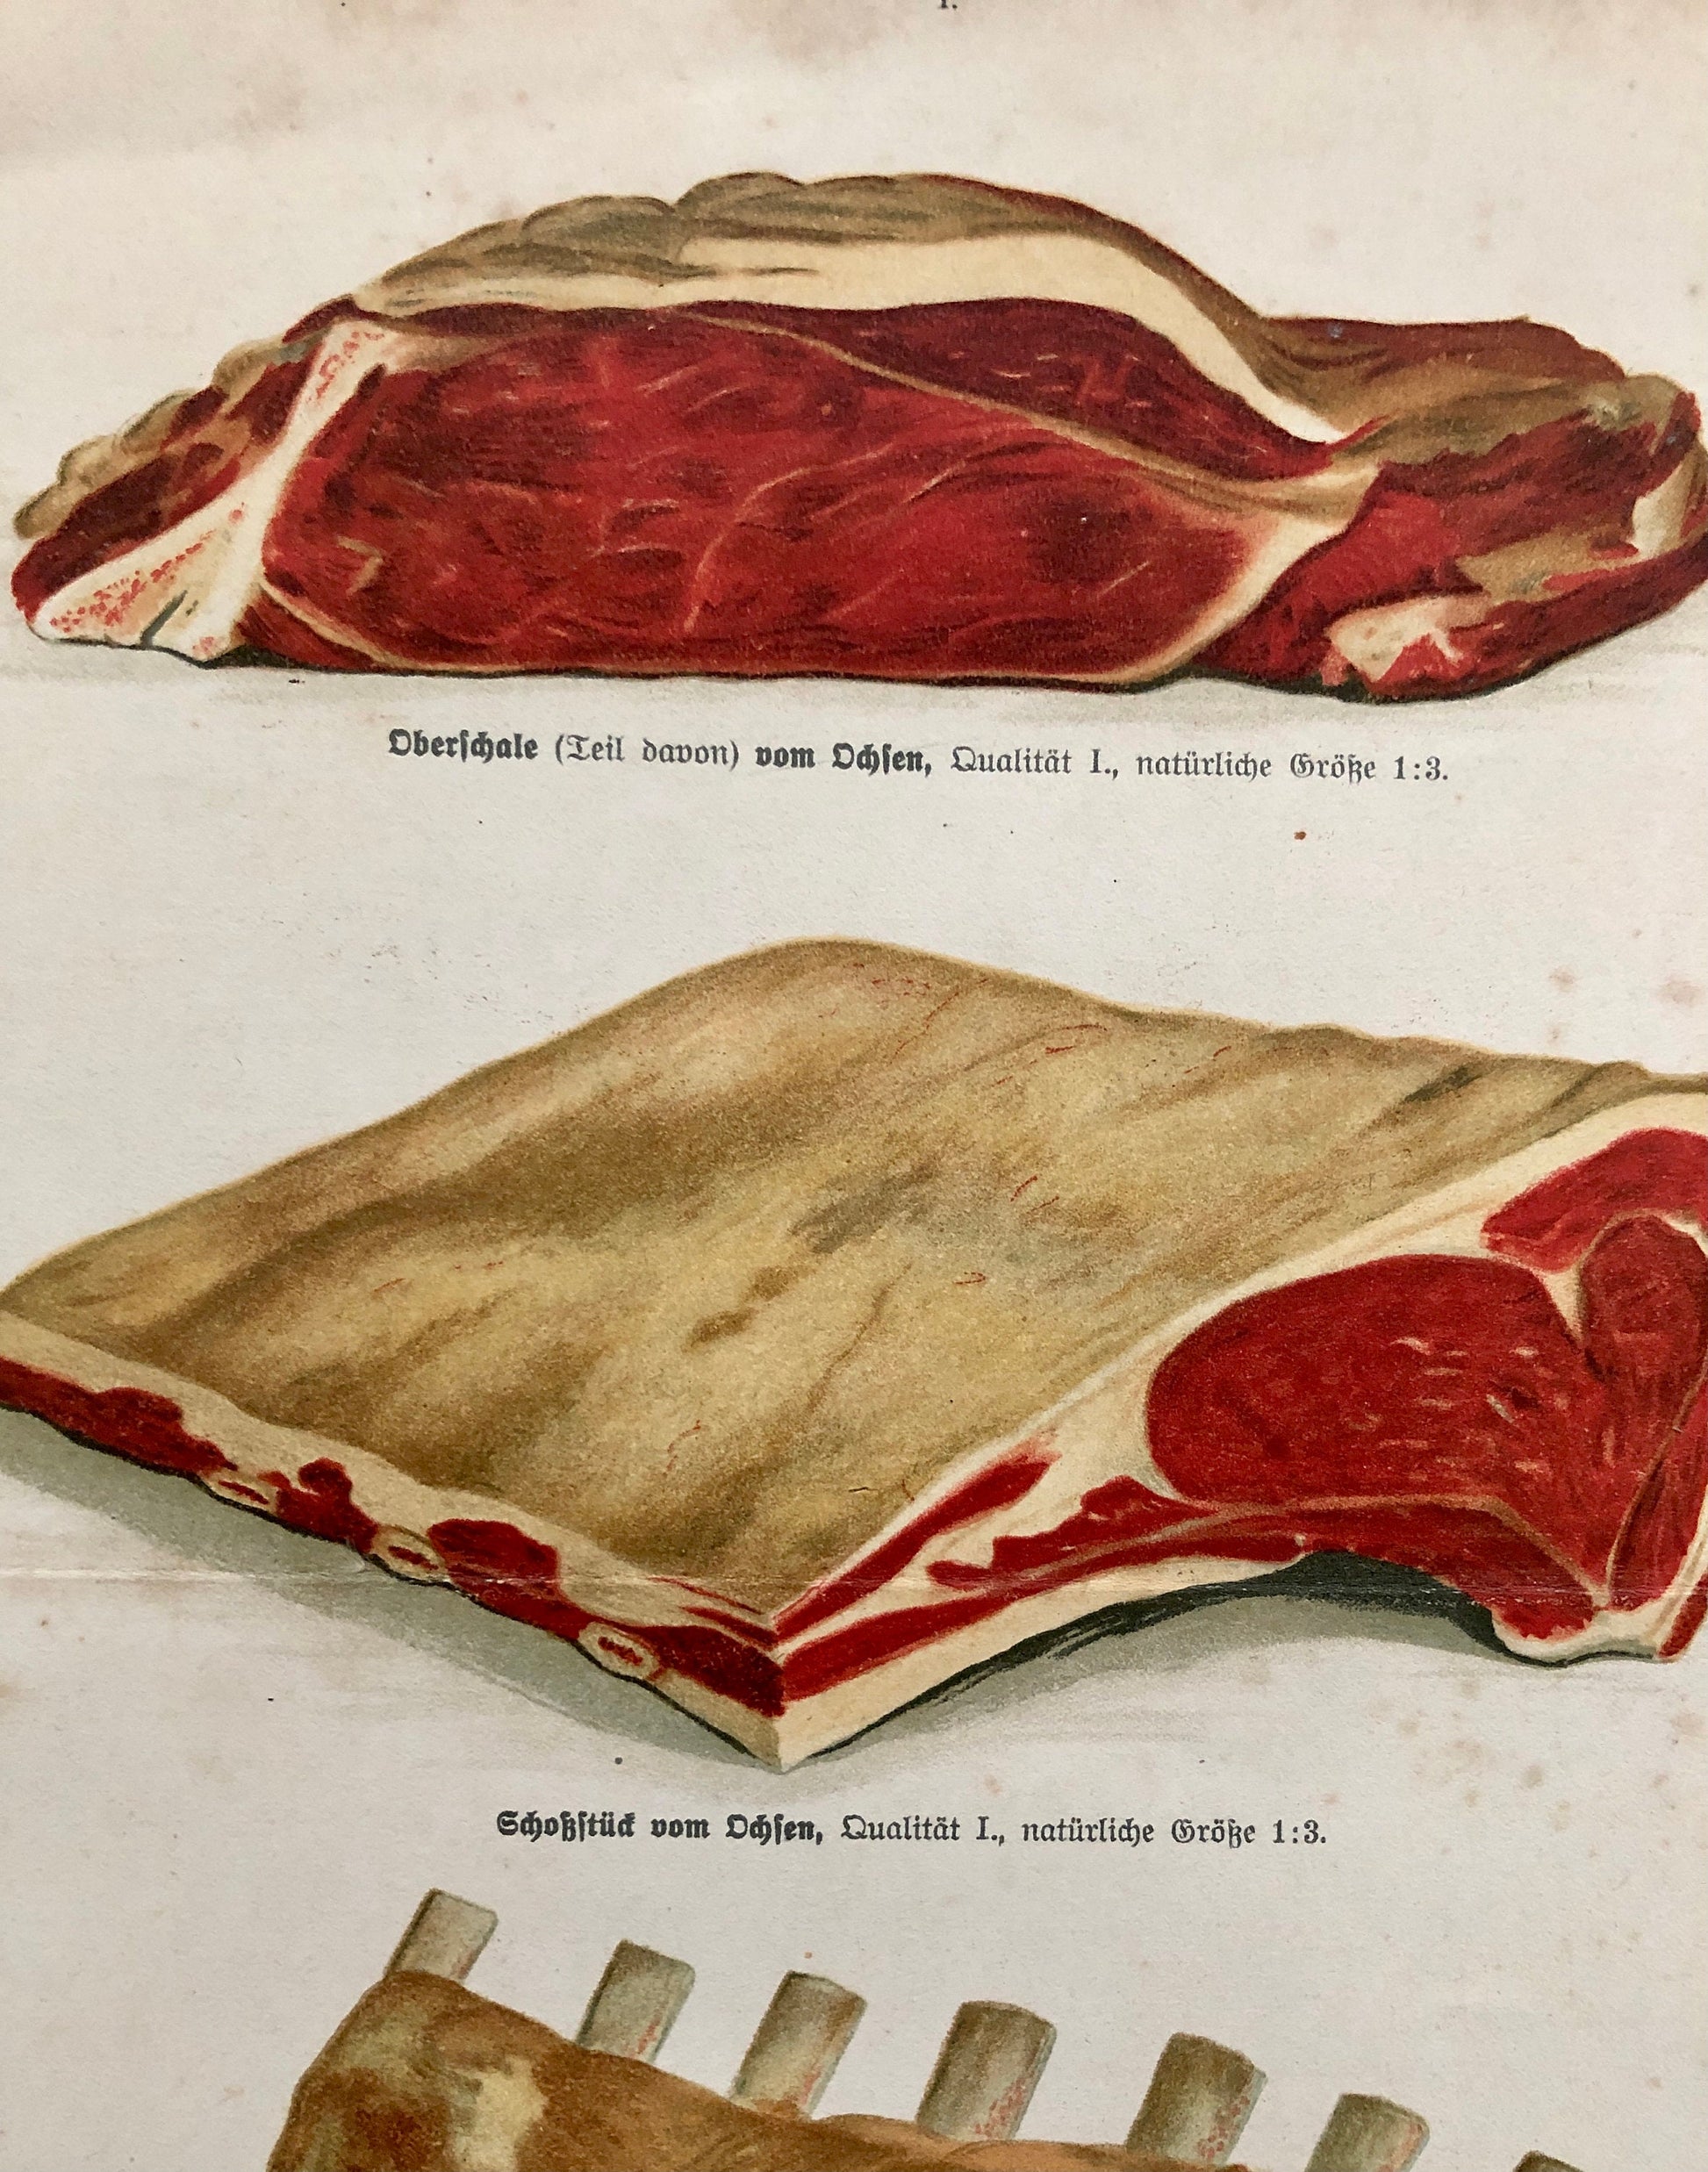 Three Large Prints From A German Cookbook Showing Various Cuts of Meat. Undated; the old script would suggest 1800’s. Size: 30 x 24 cms.